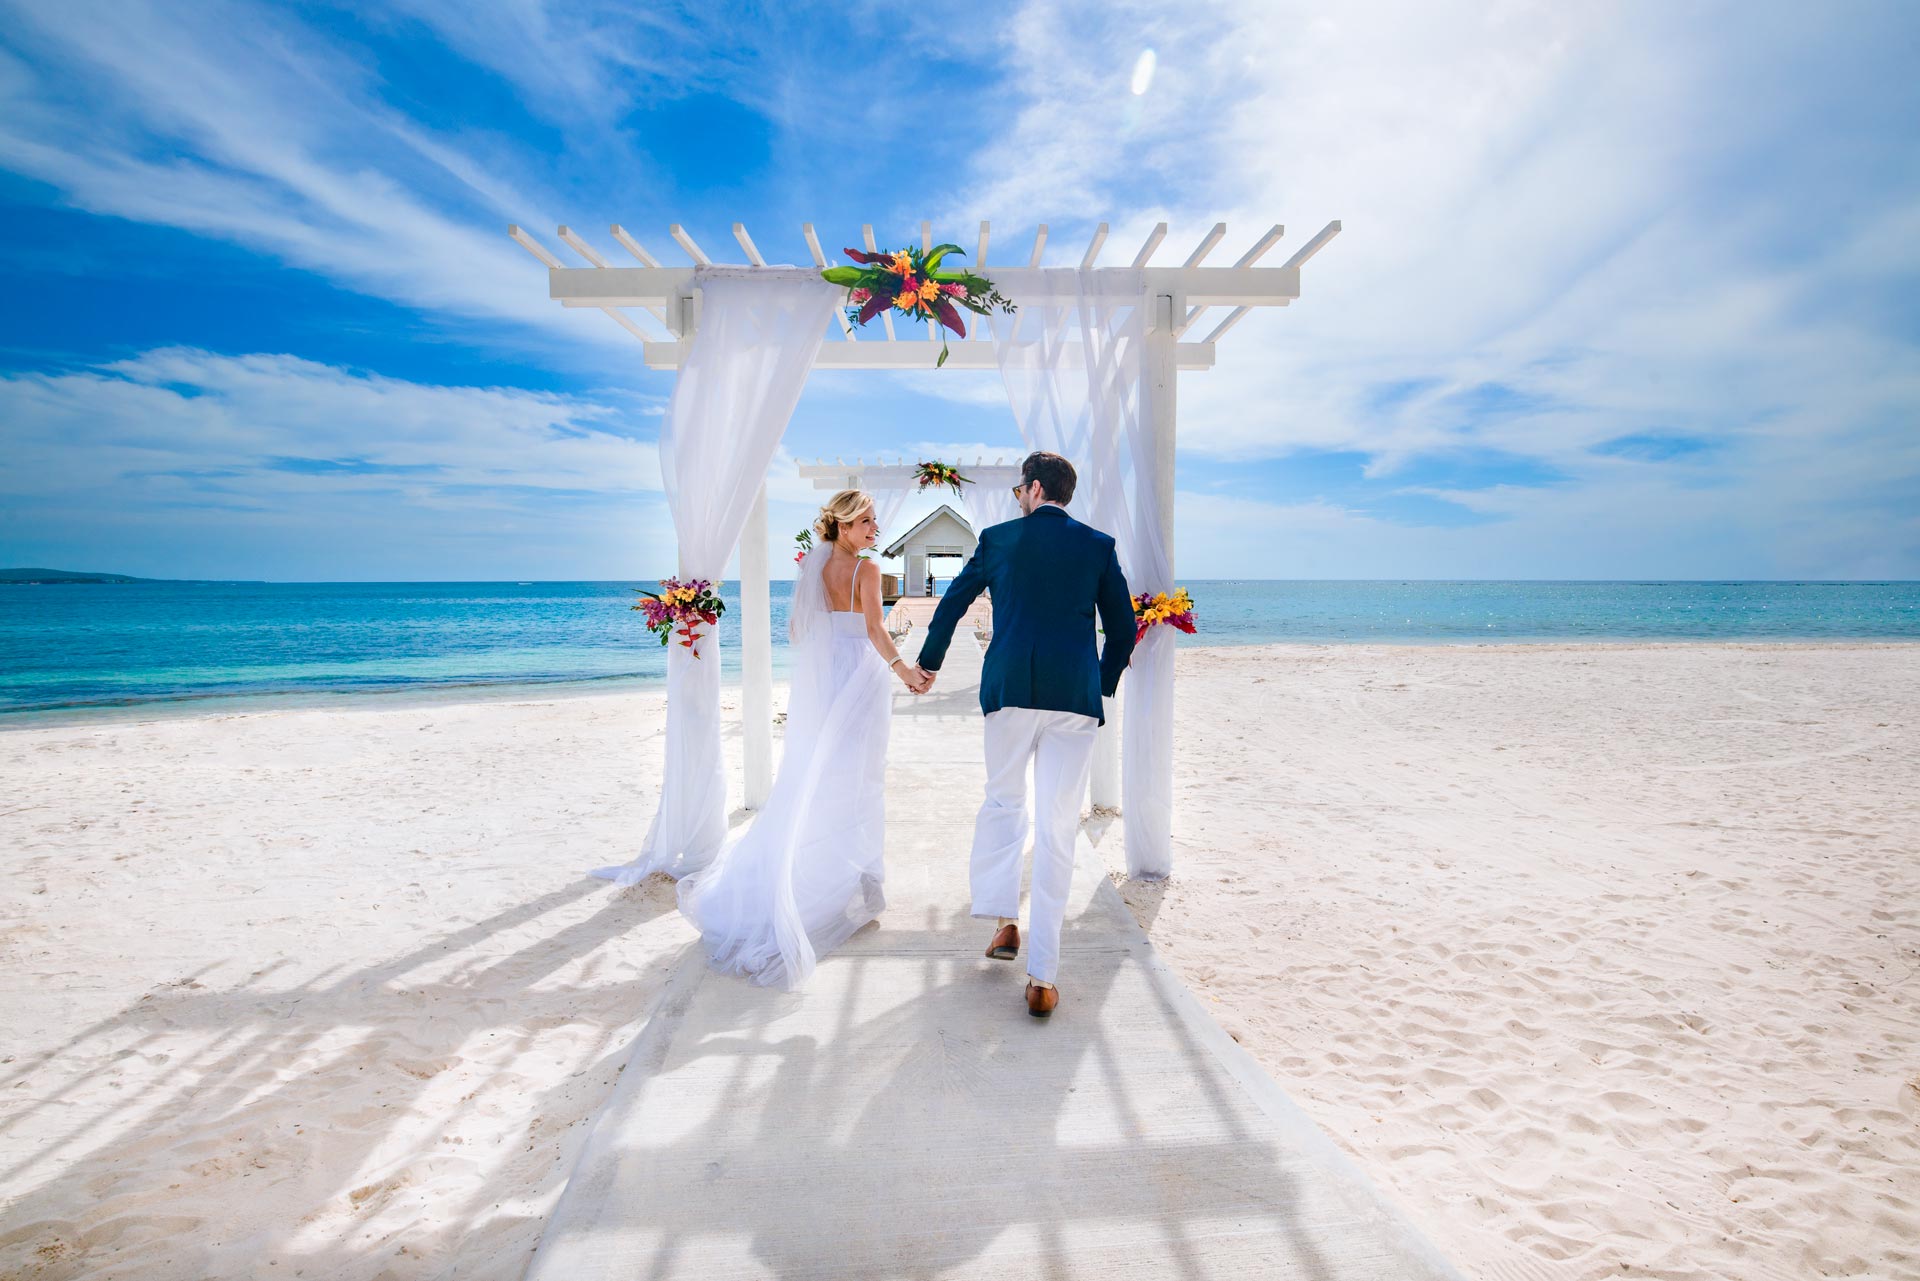 Getting Married on a Beach